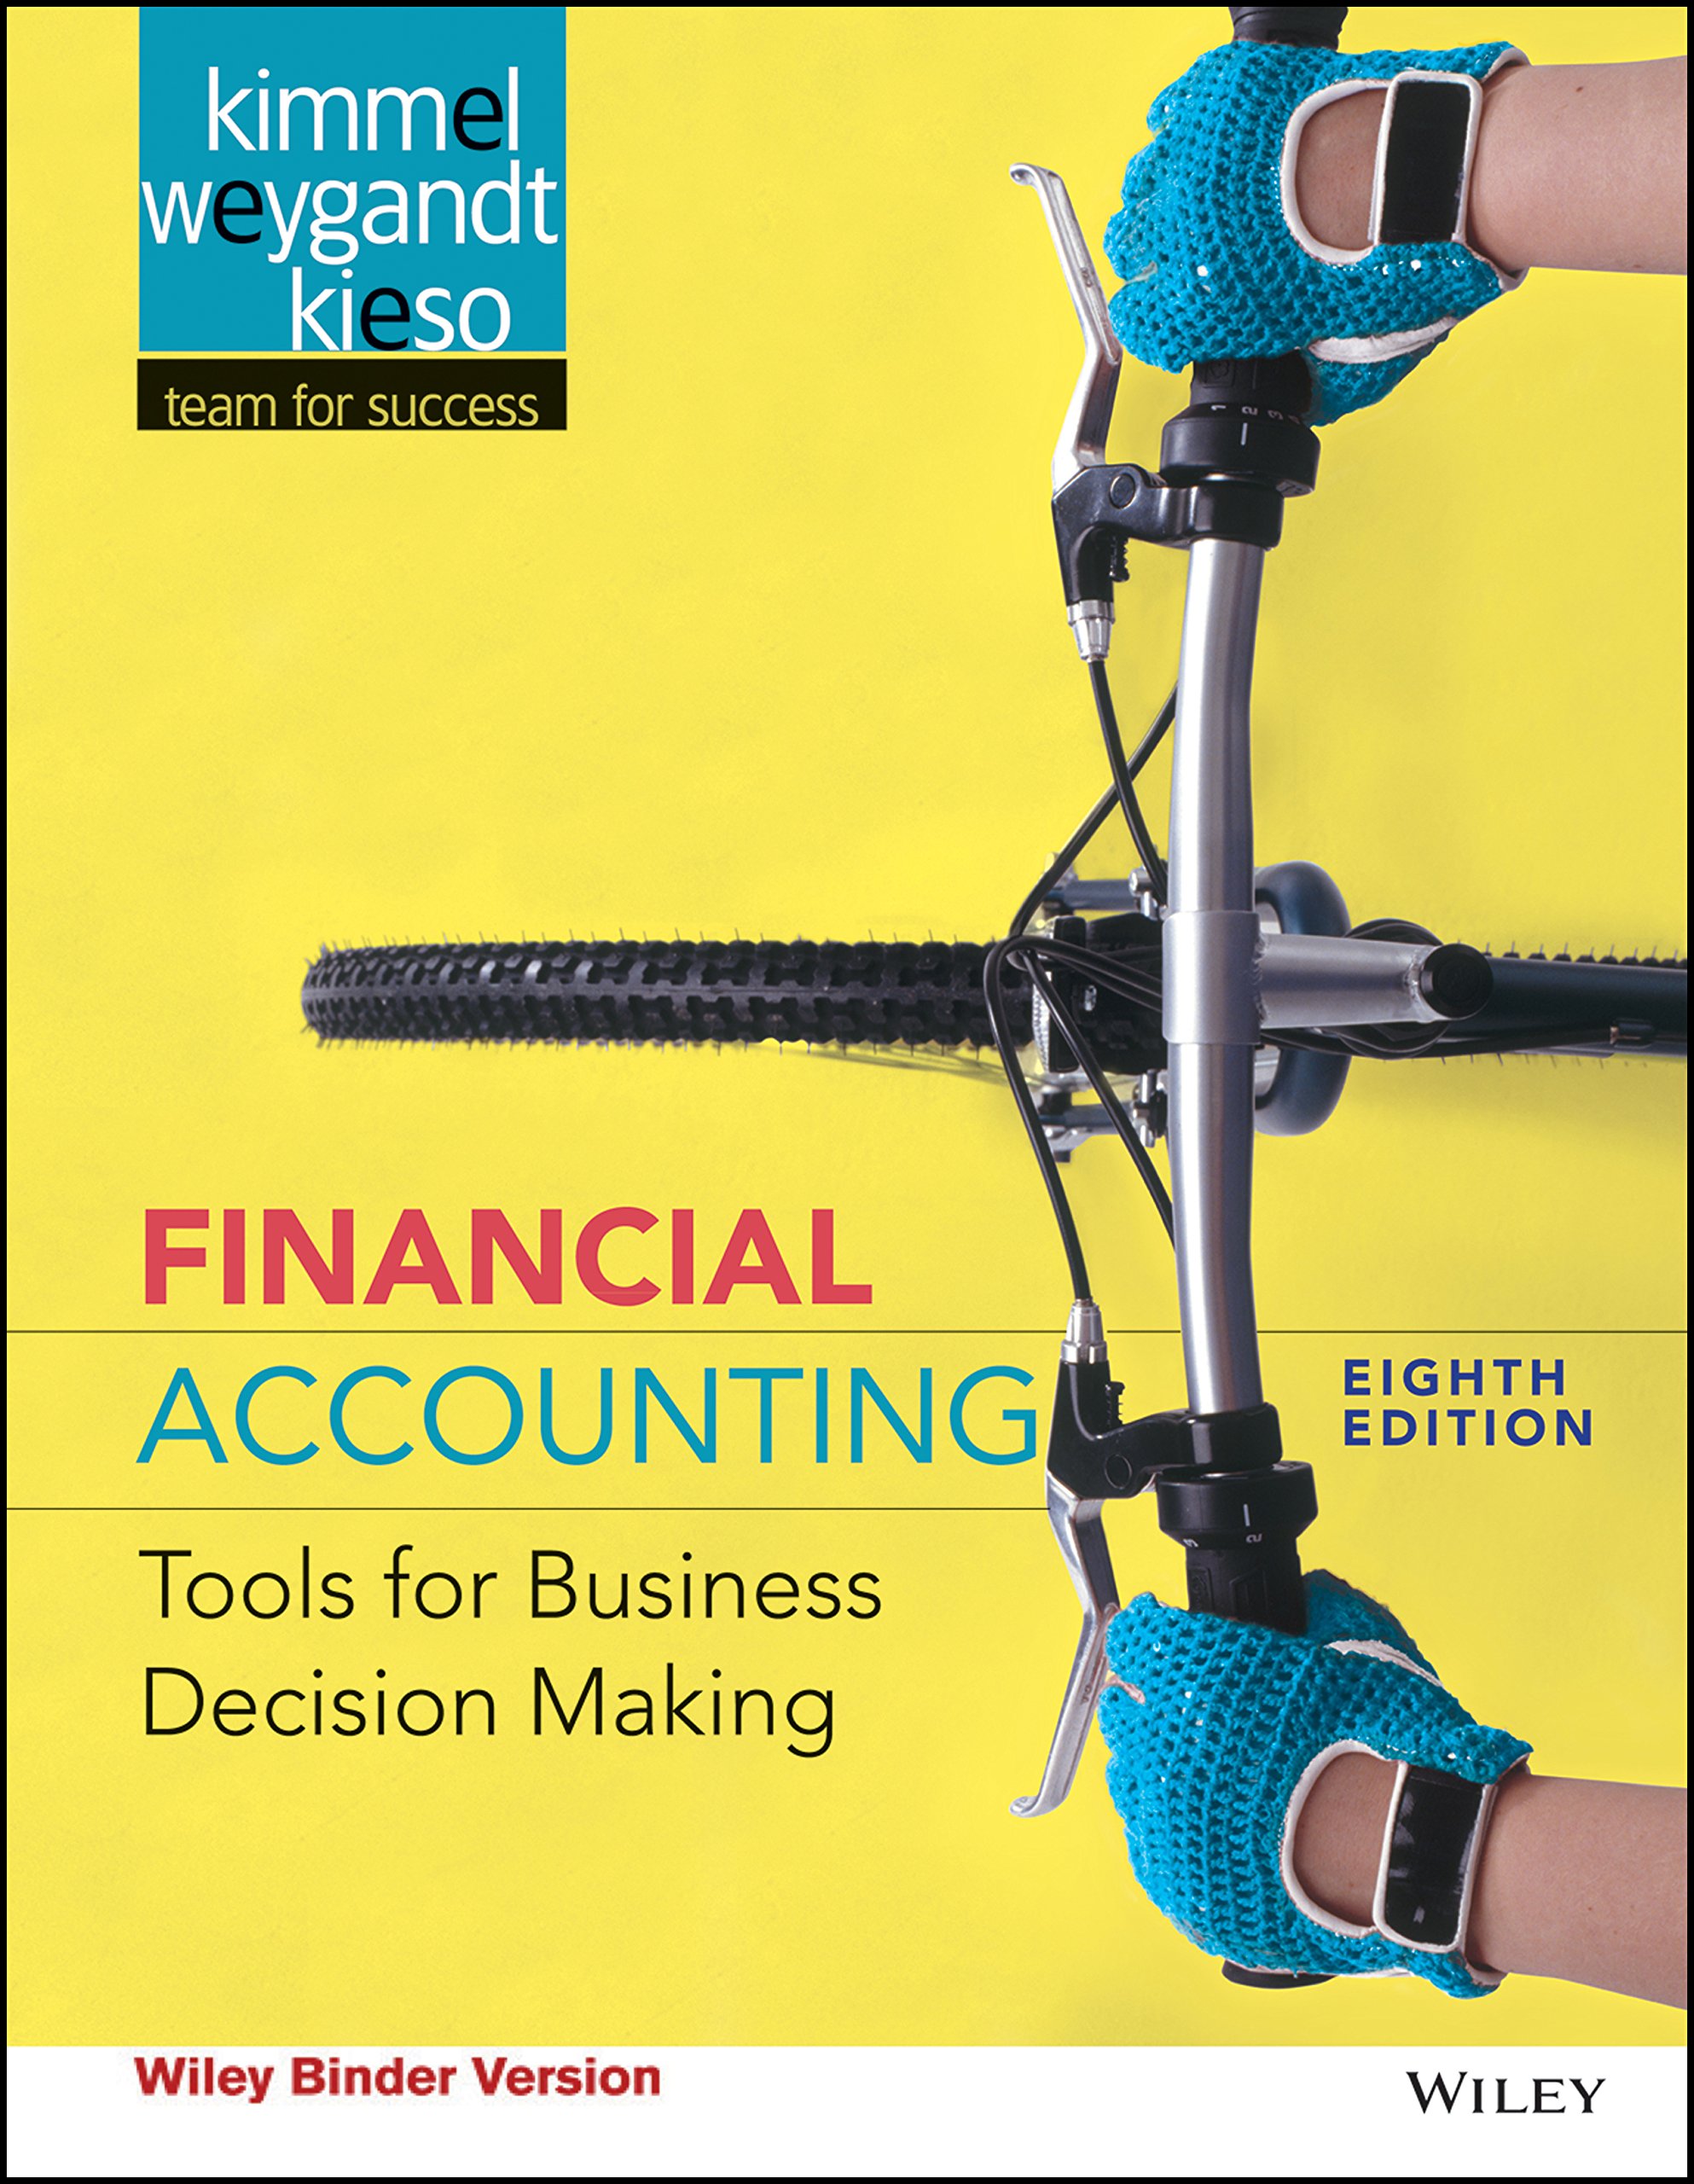 Financial Accounting: Tools for Business Decision Making, 8th Edition